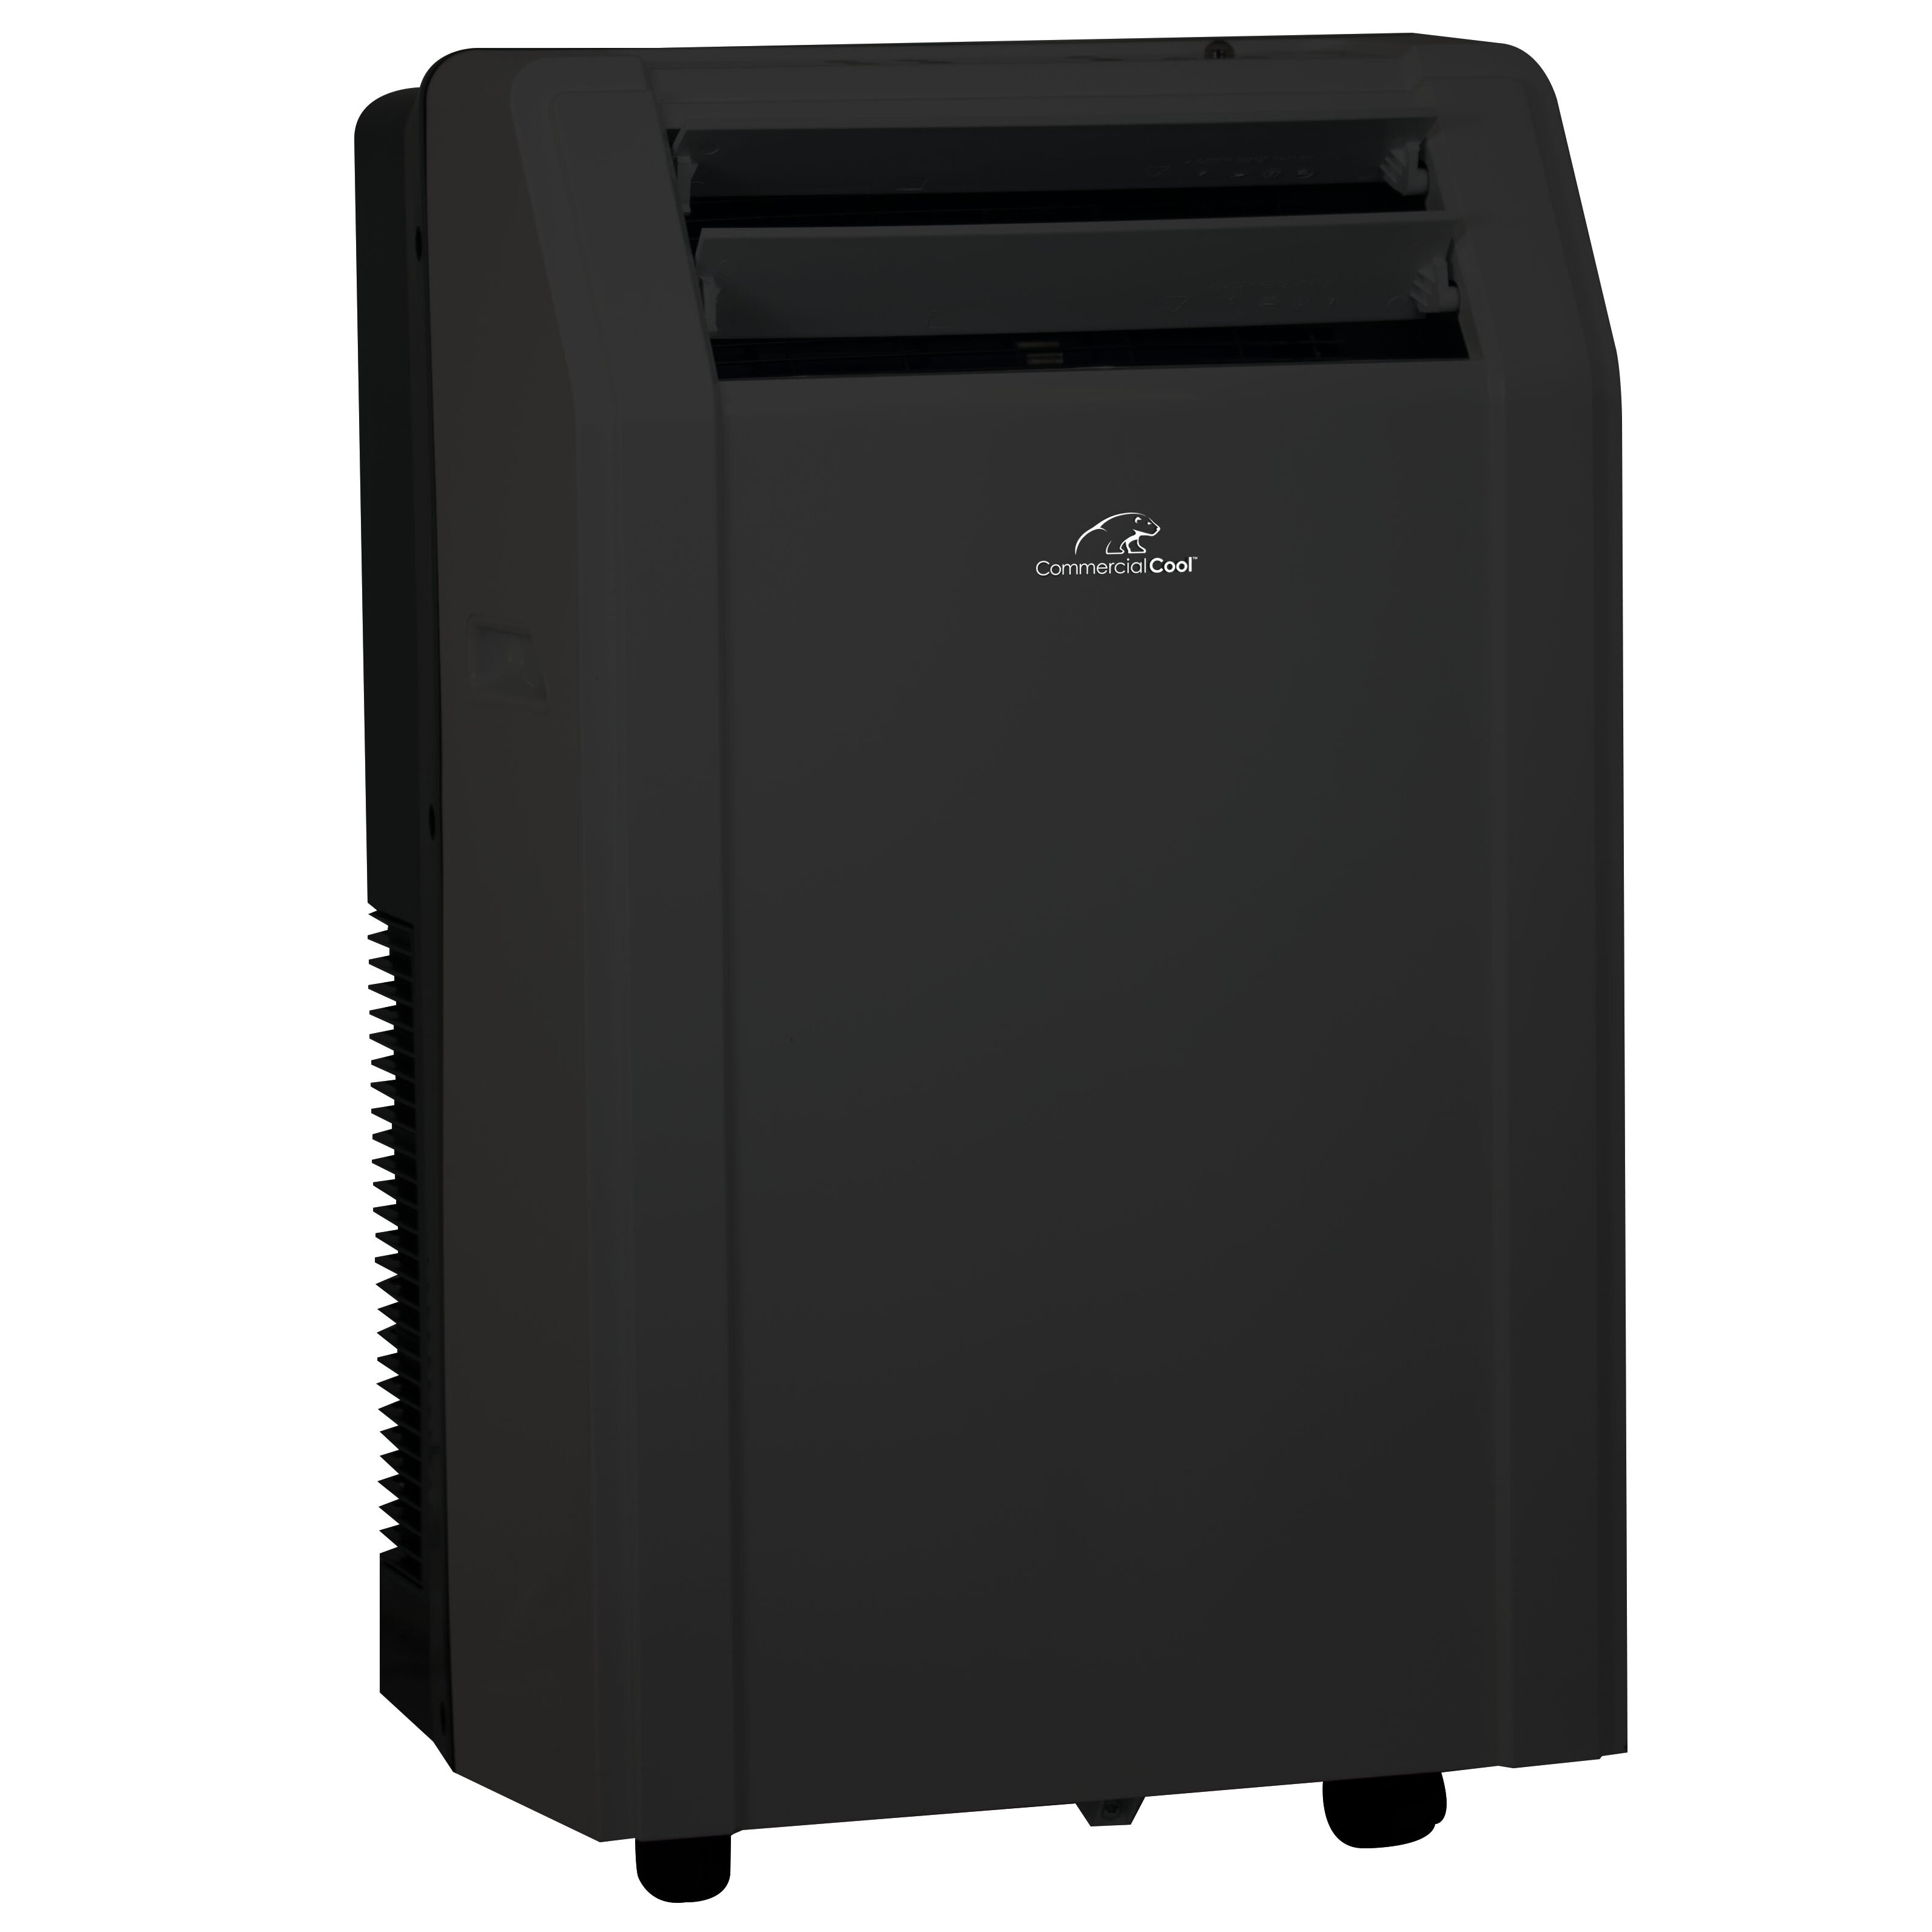 Commercial Cool 12,000 BTU Energy Star Portable Air Conditioner with Remote & Reviews Wayfair